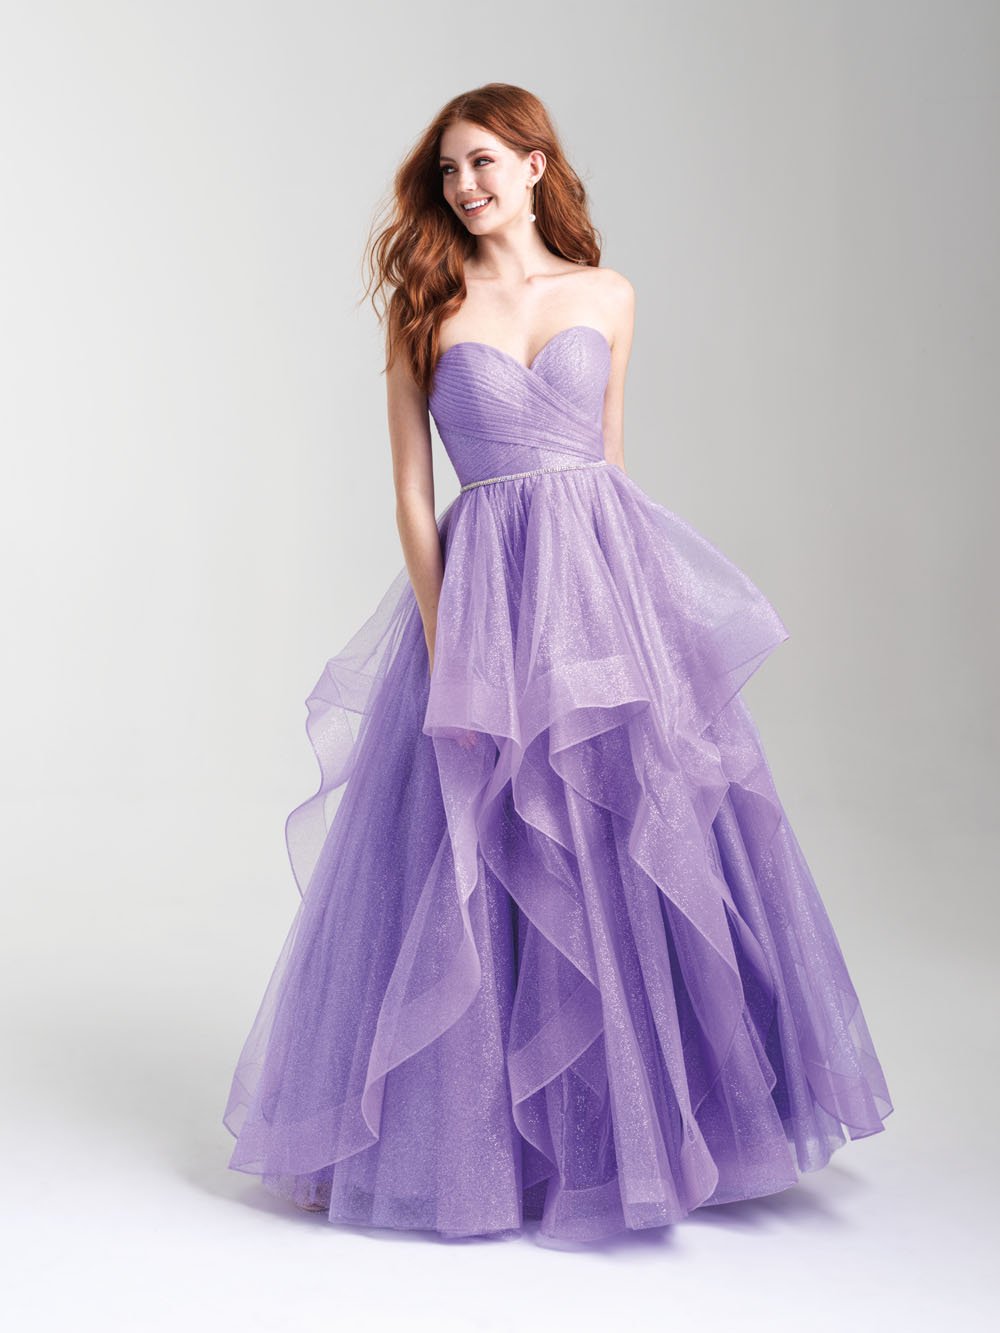 Madison James 20-300 dress images in these colors: Pink, Purple, Blue.